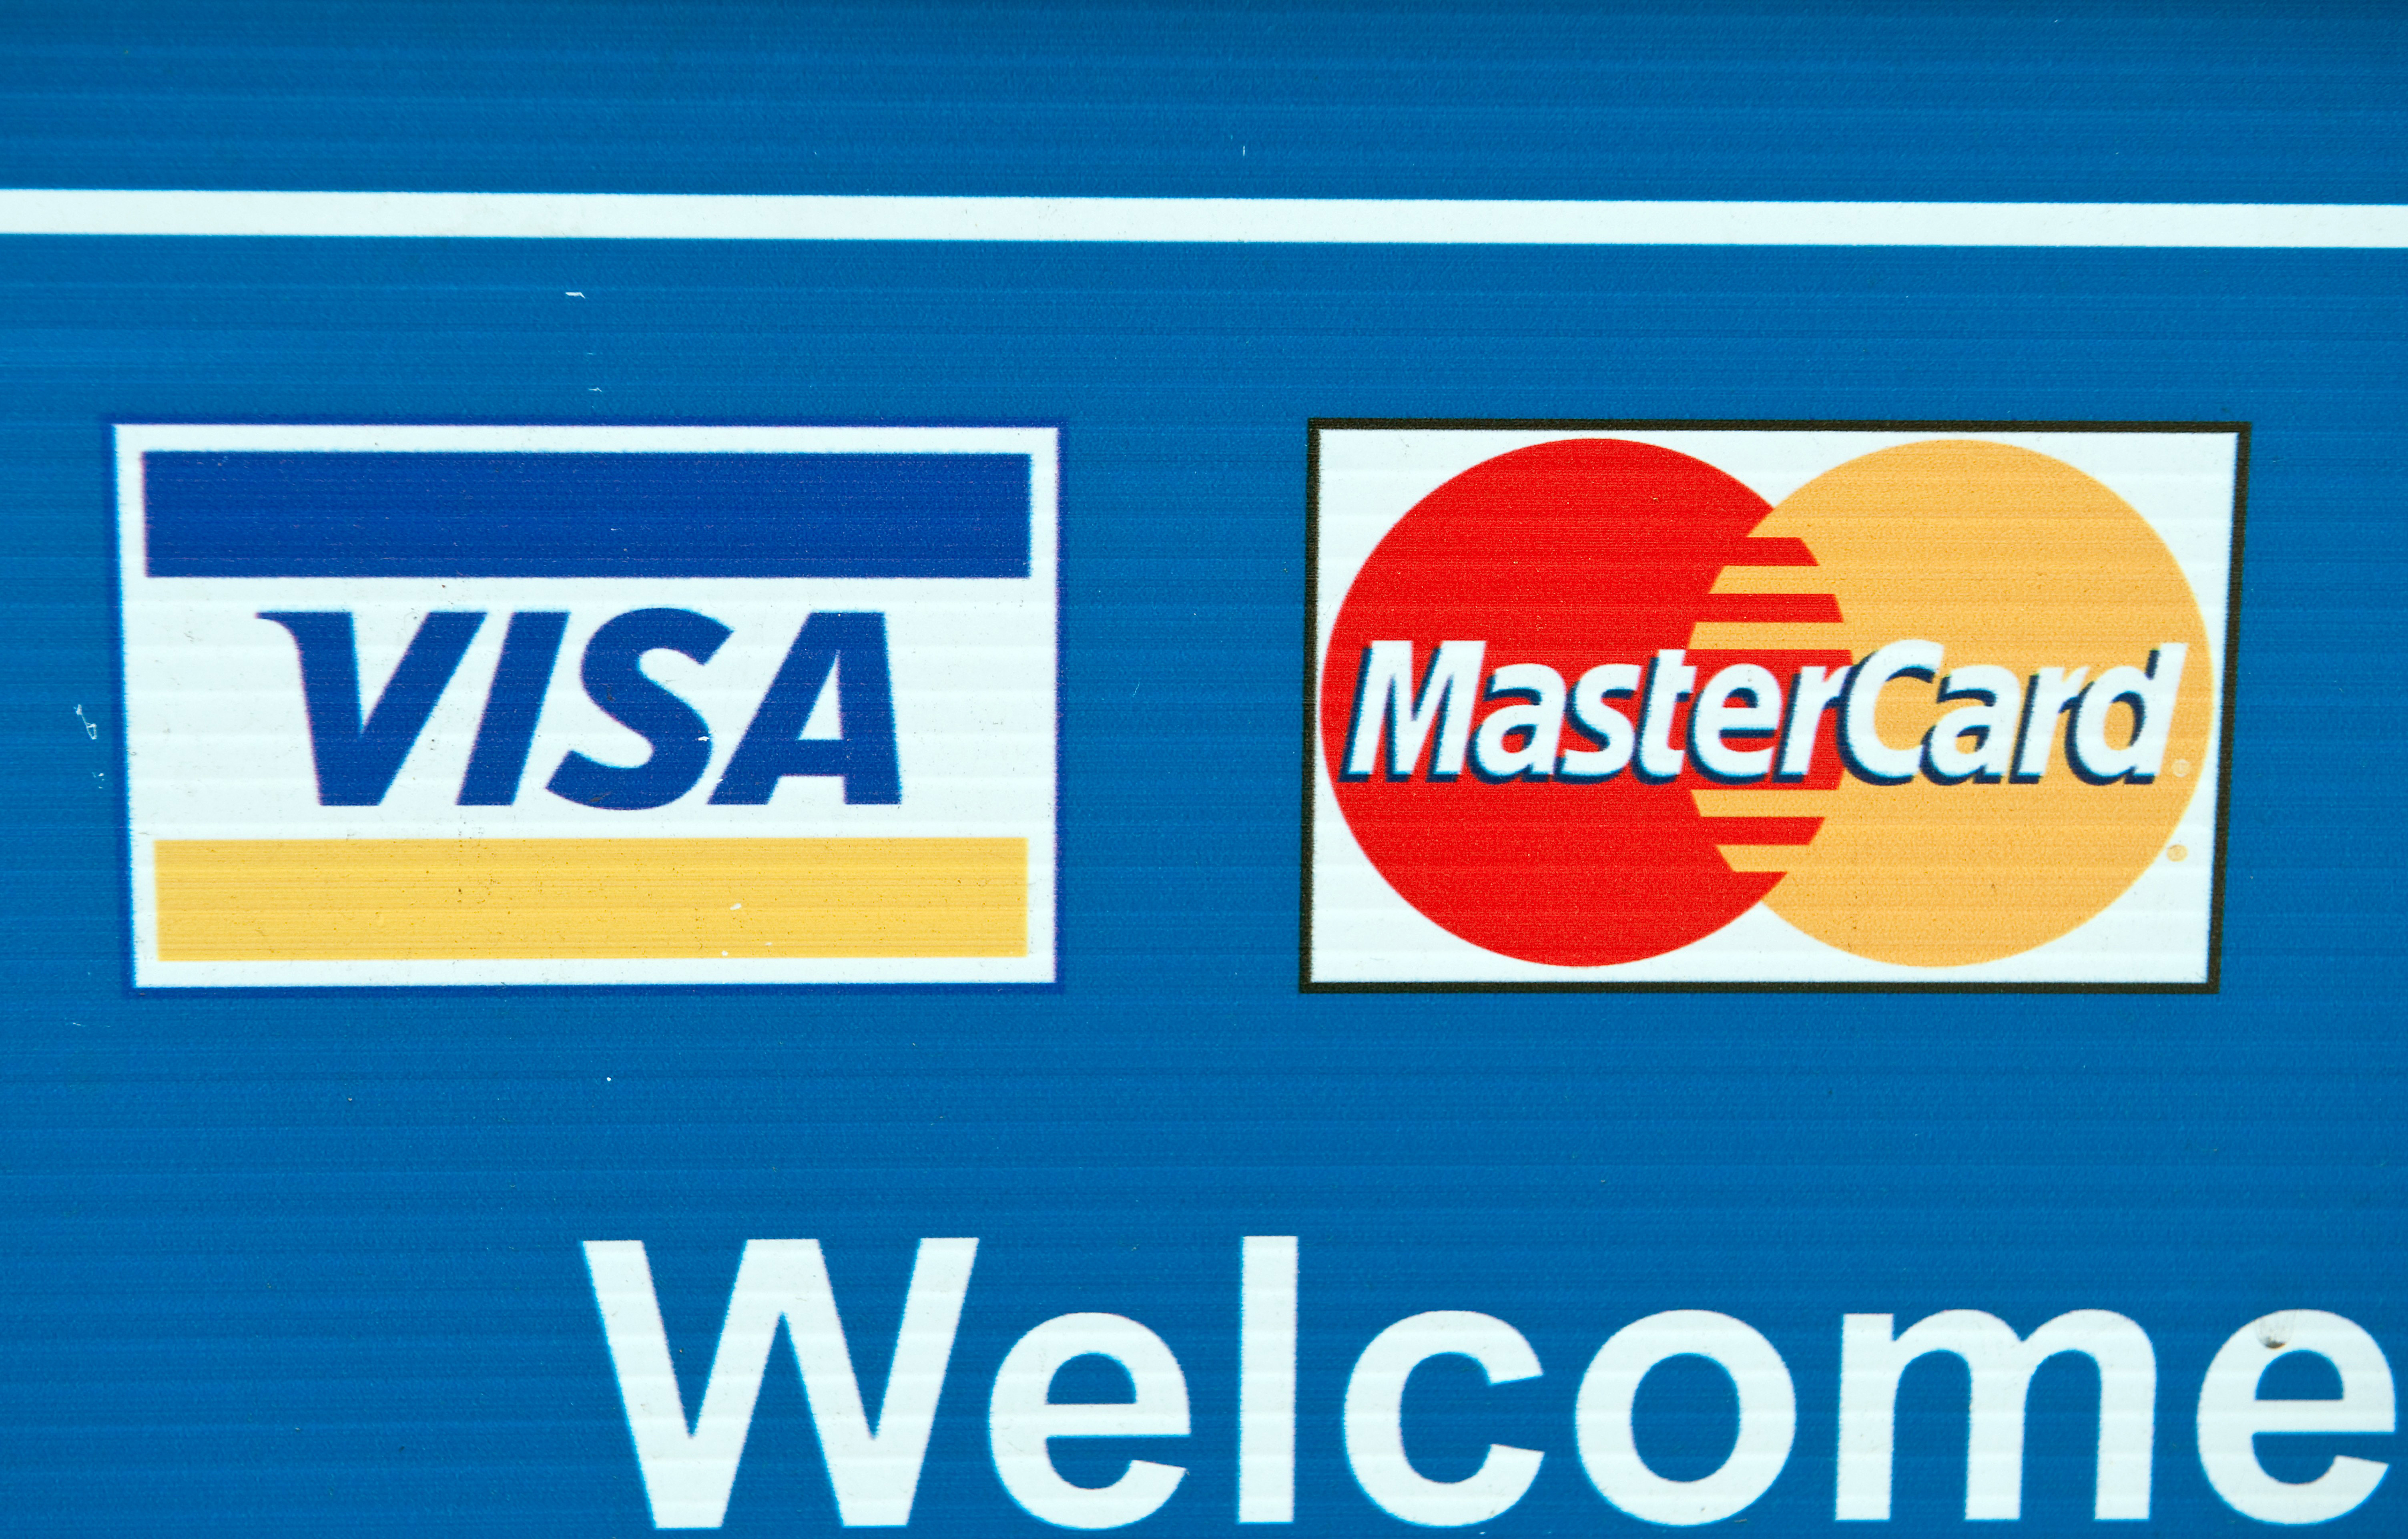 What's the Difference Between Visa and Mastercard?